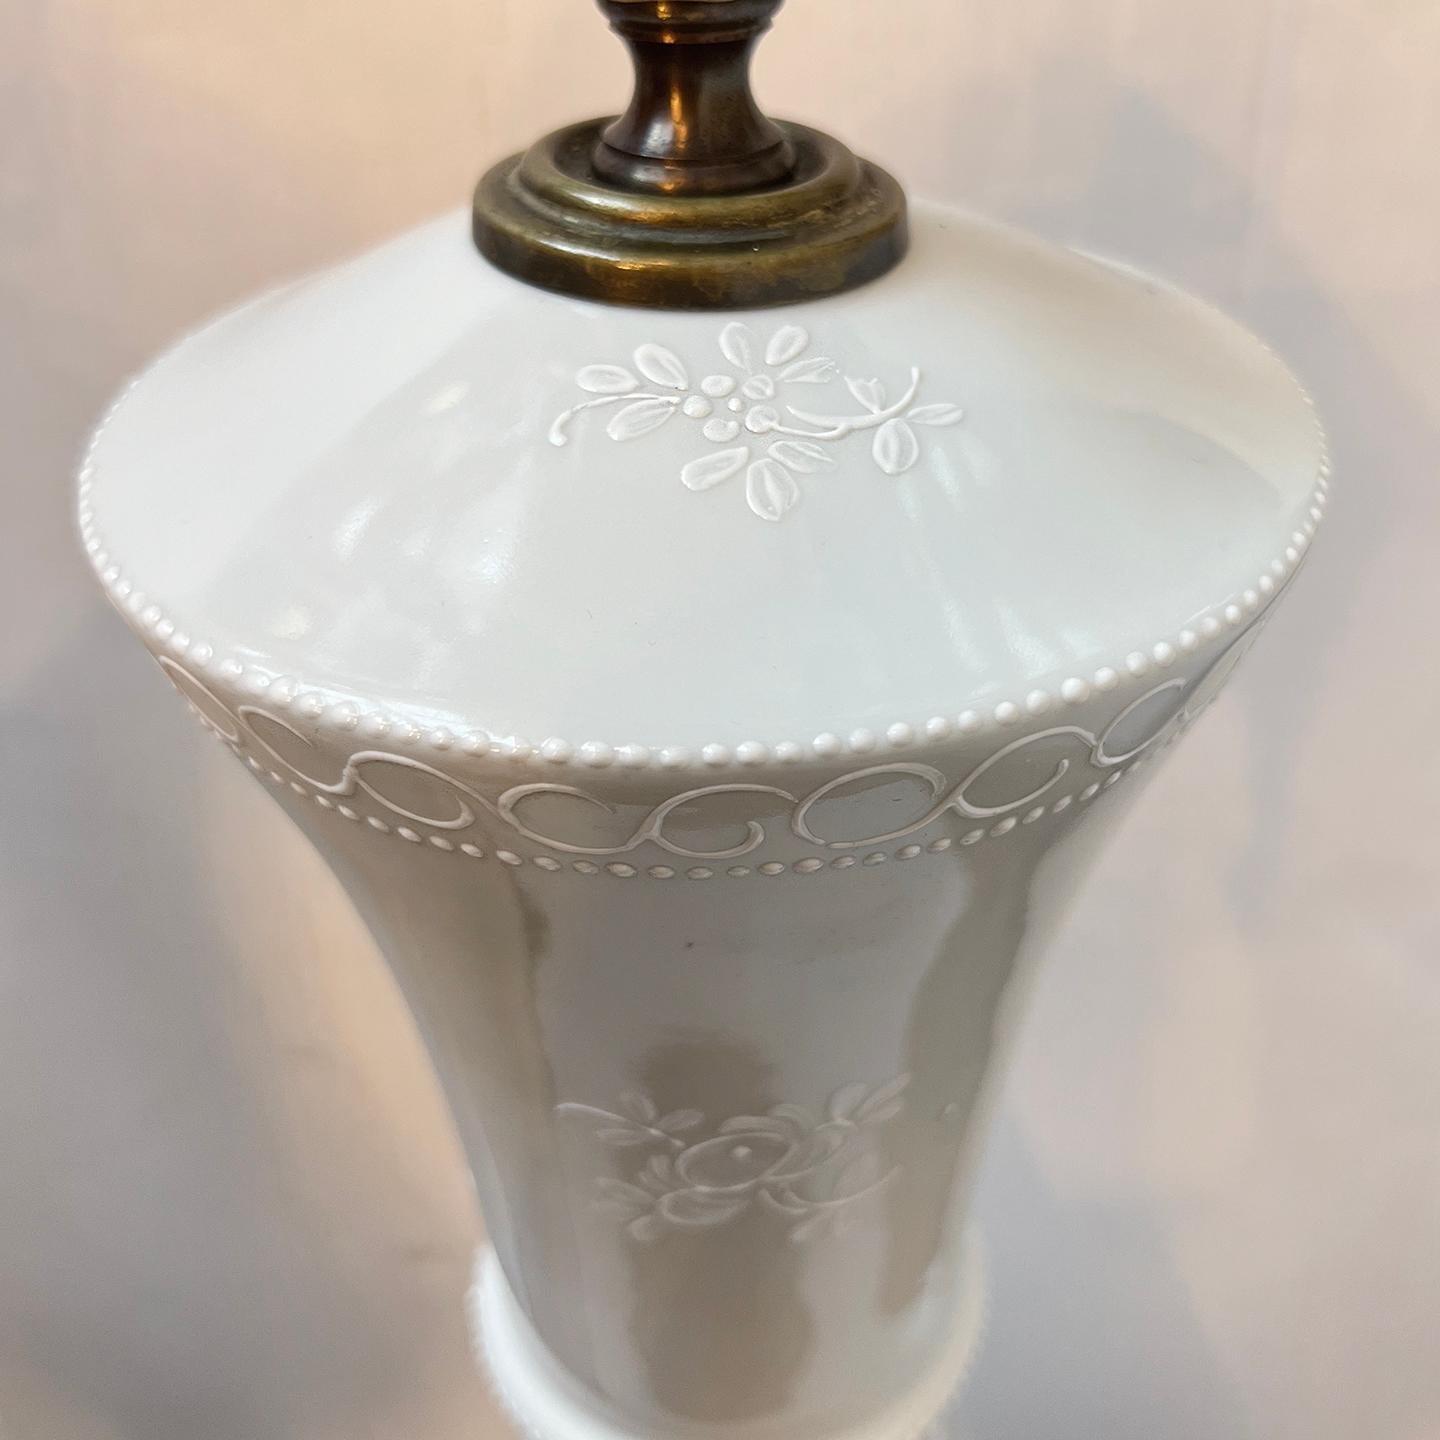 Pair of 1960's Danish porcelain table lamps with floral motif.

Measurements:
Height of body: 23.25